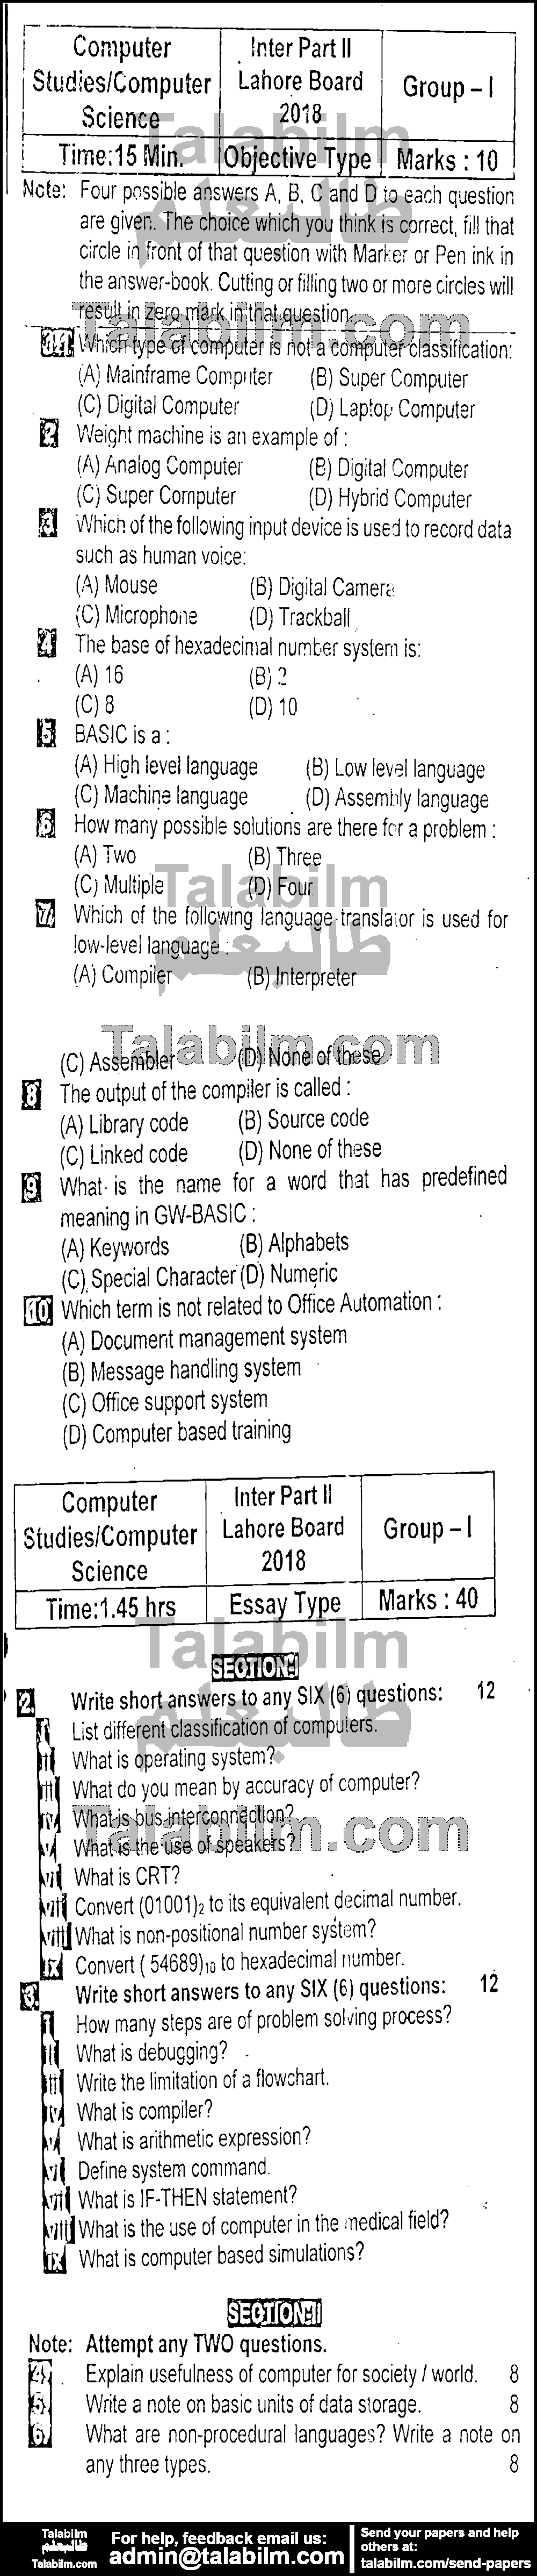 Computer Science 0 past paper for Group-I 2018